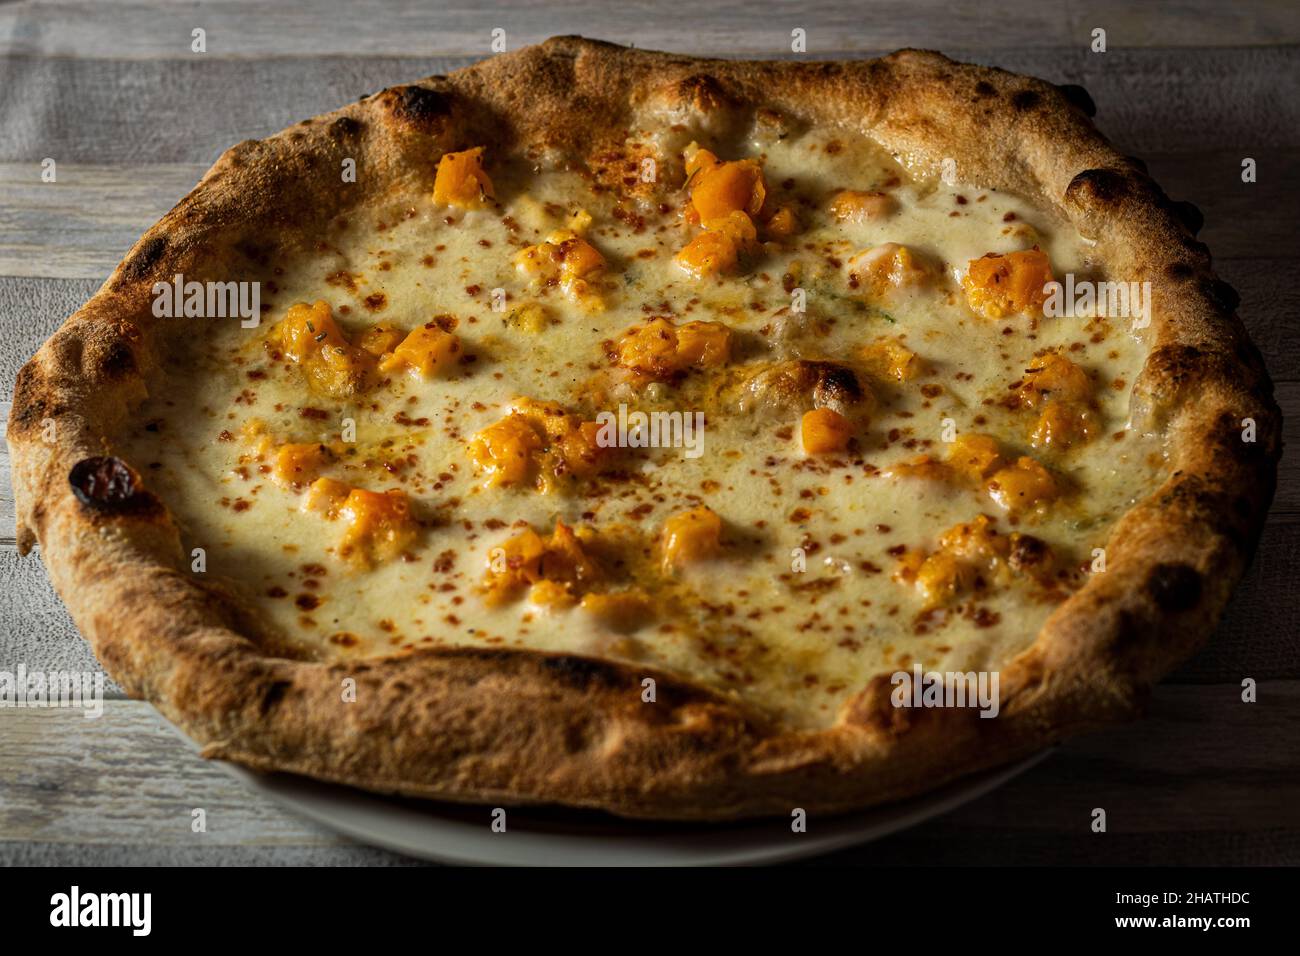 stuffed pizza on wooden background Stock Photo